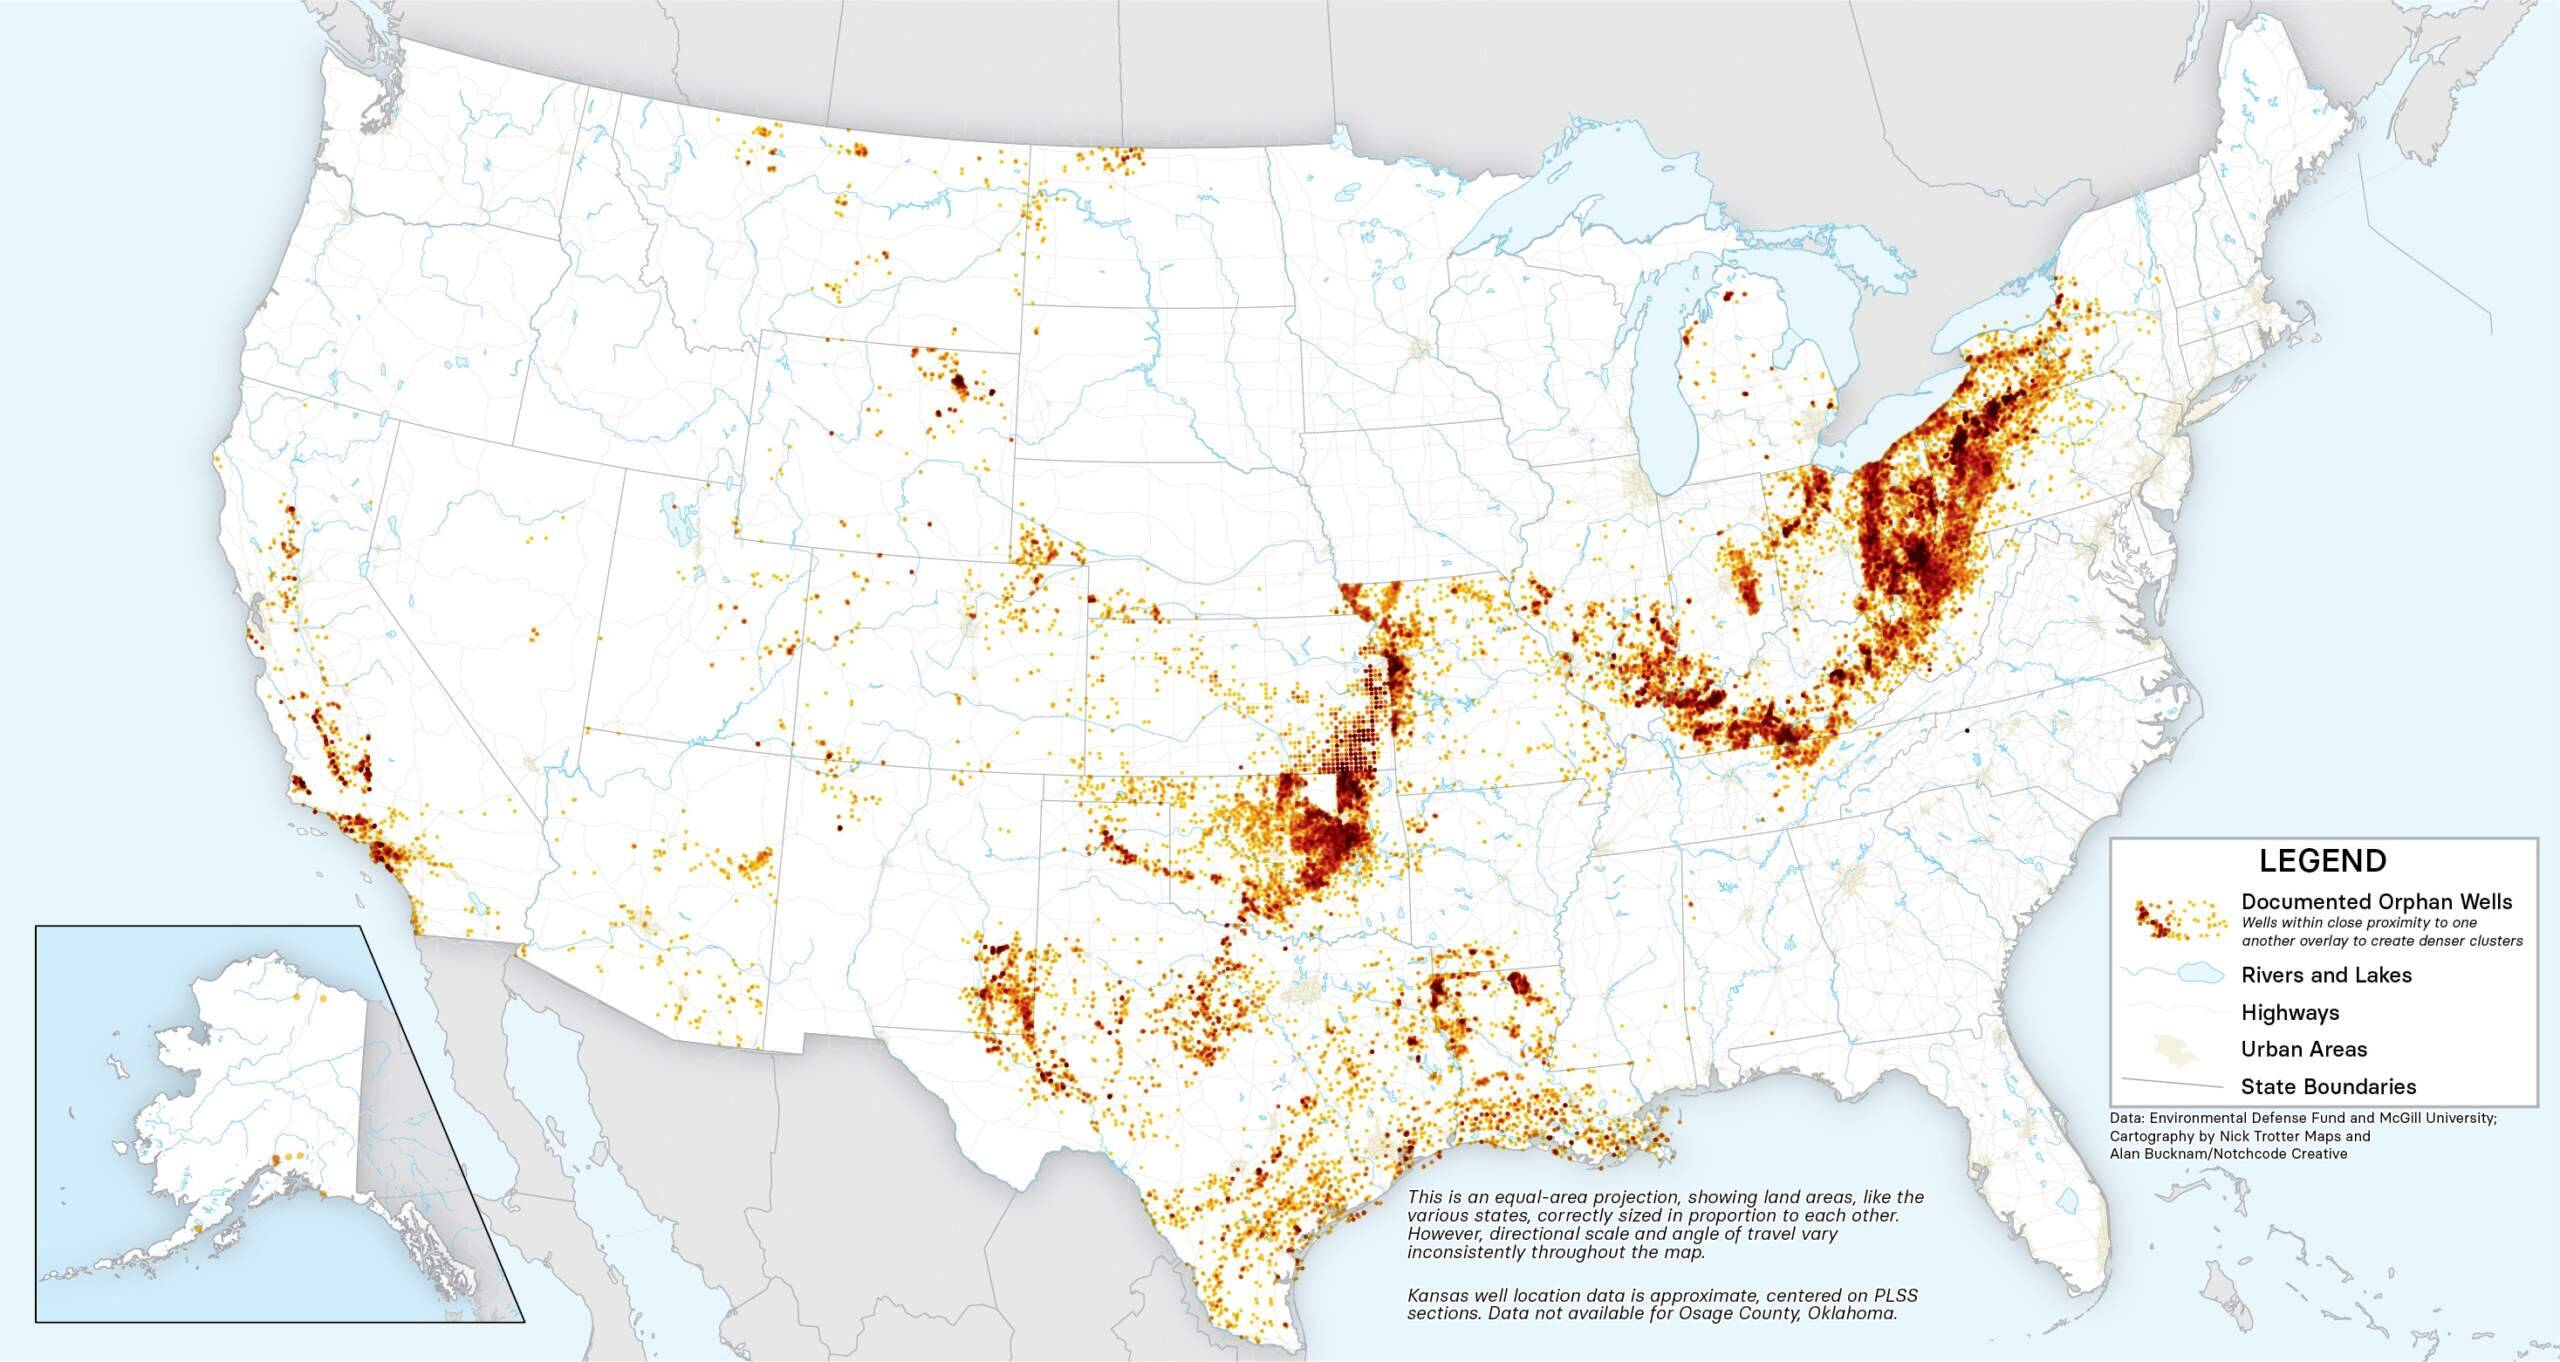 A map of orphan wells in the U.S. (Courtesy of the Environmental Defense Fund)